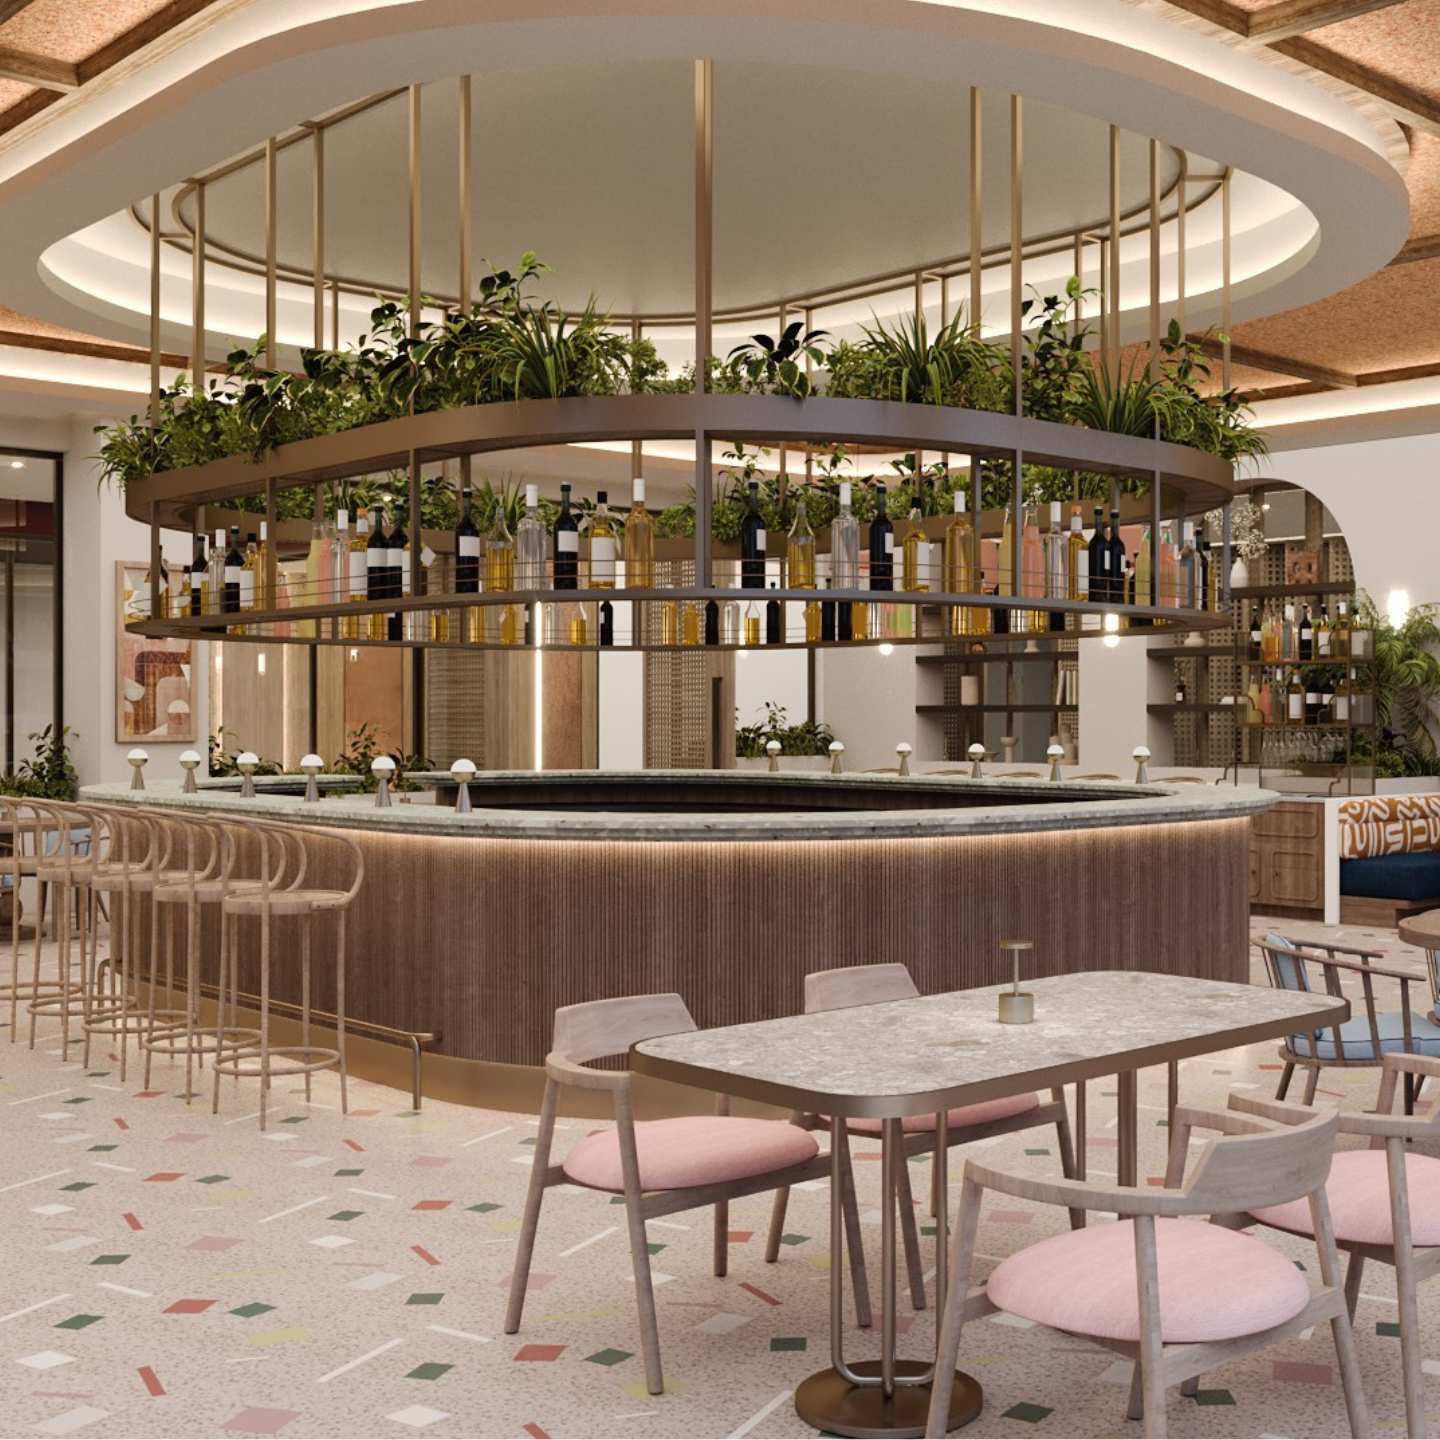 Brass oval bar with lots of greenery, light brown barstools, and marble table with pink chairs, floor with an abstract colorful design